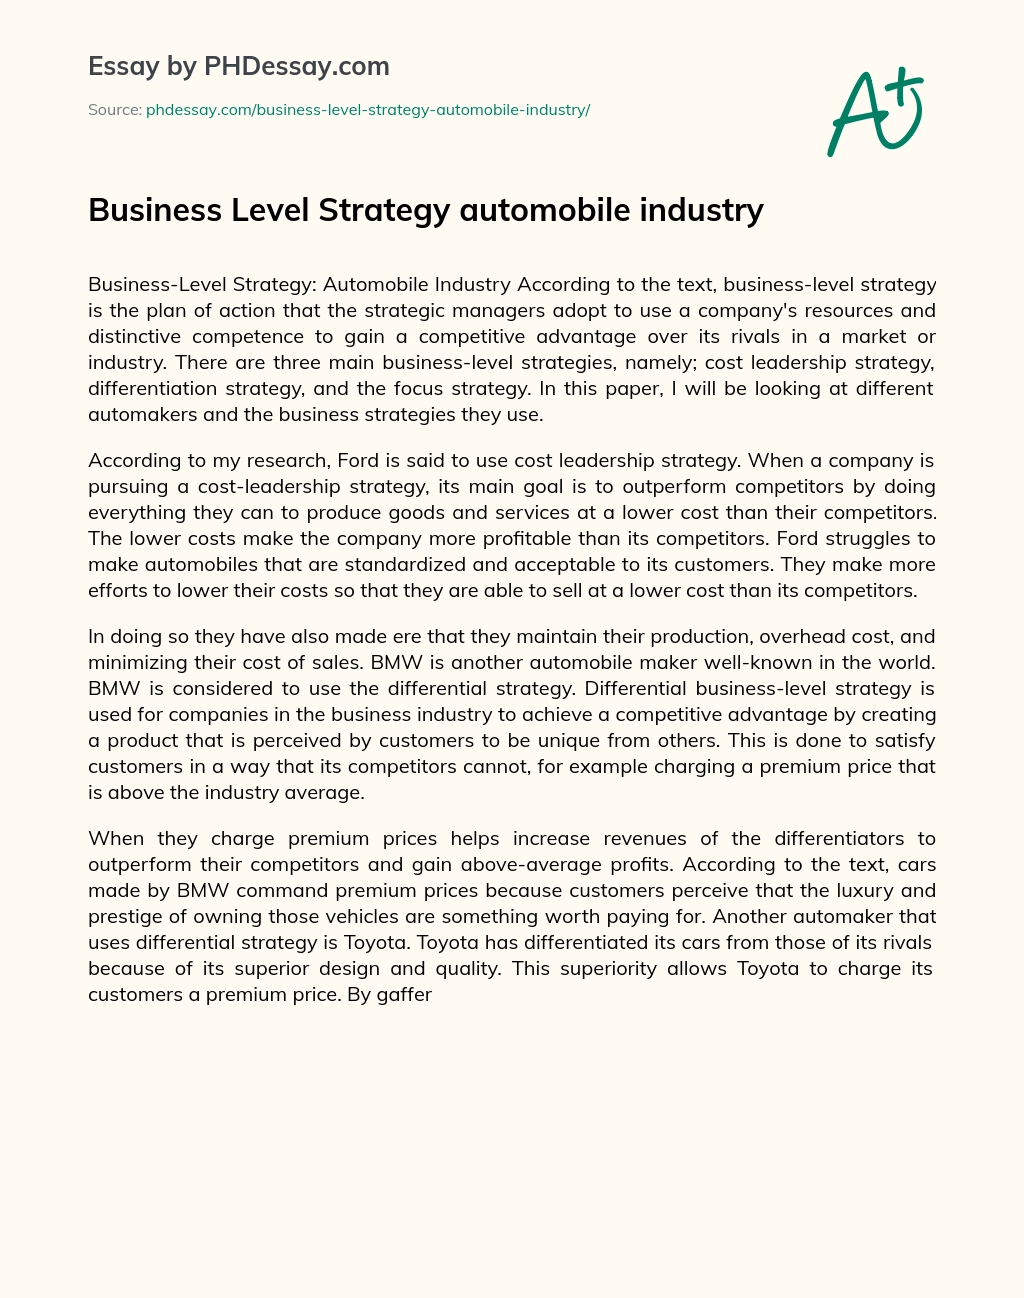 Business Level Strategy automobile industry essay